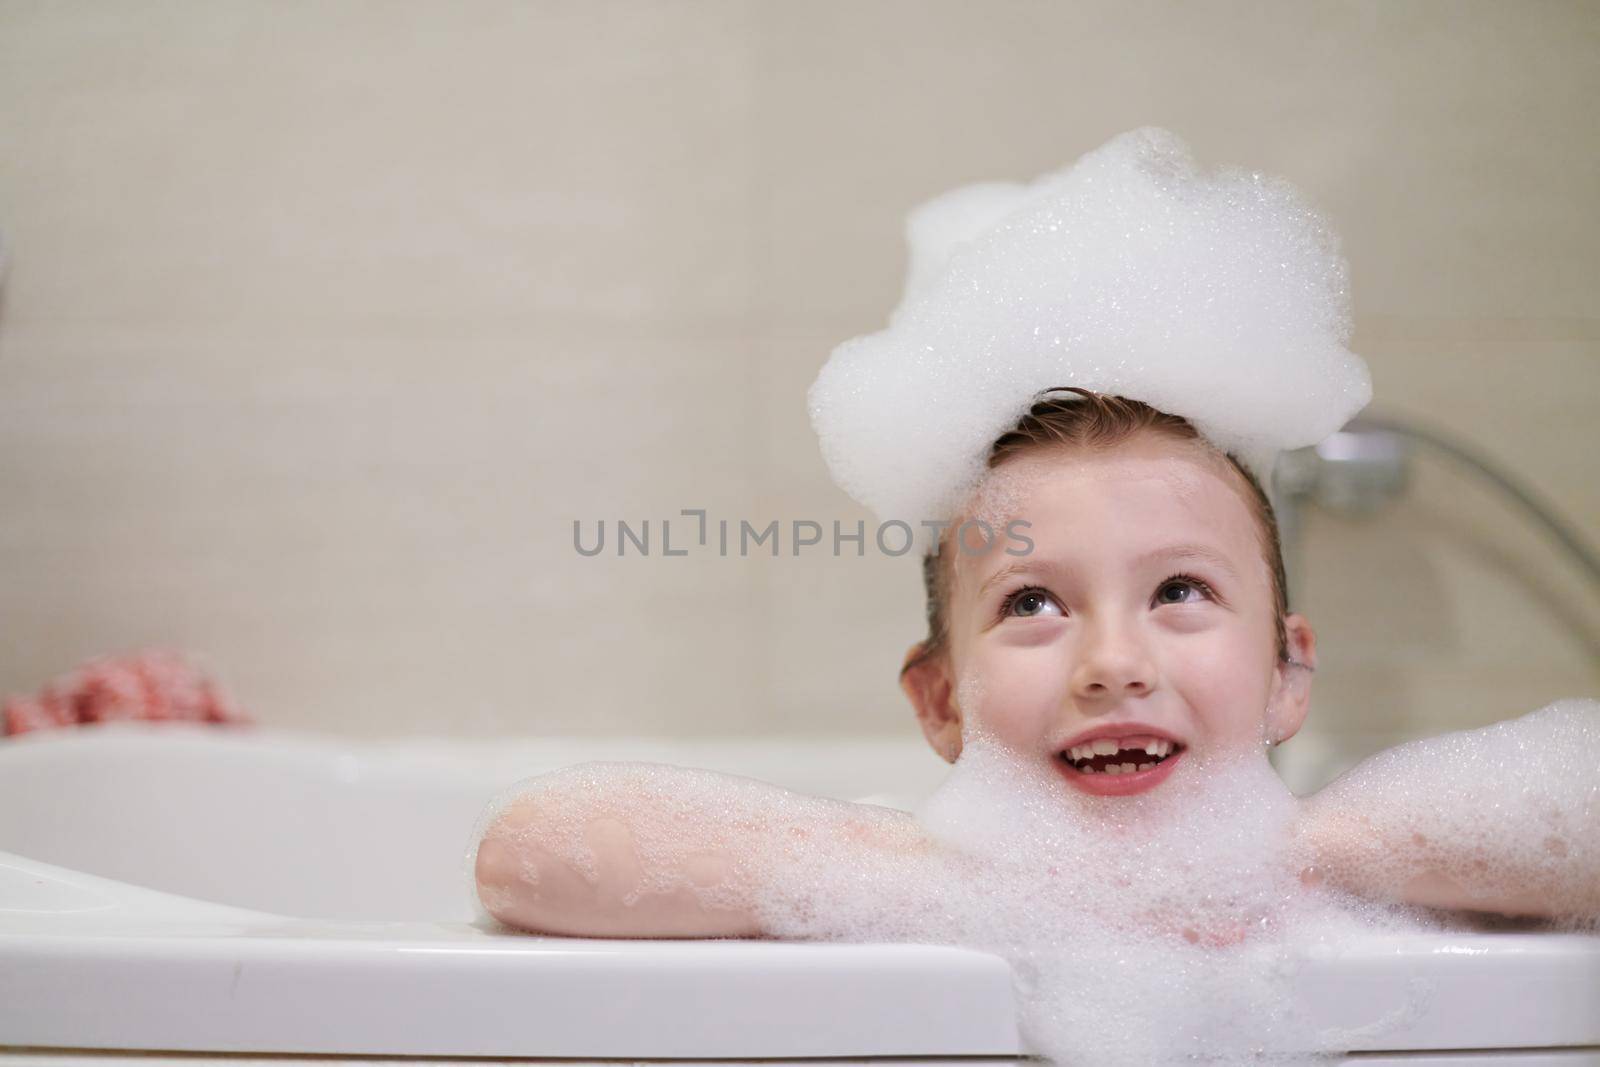 little girl playing with soap foam in bath during coronavirus stay at home pandemic quarantine